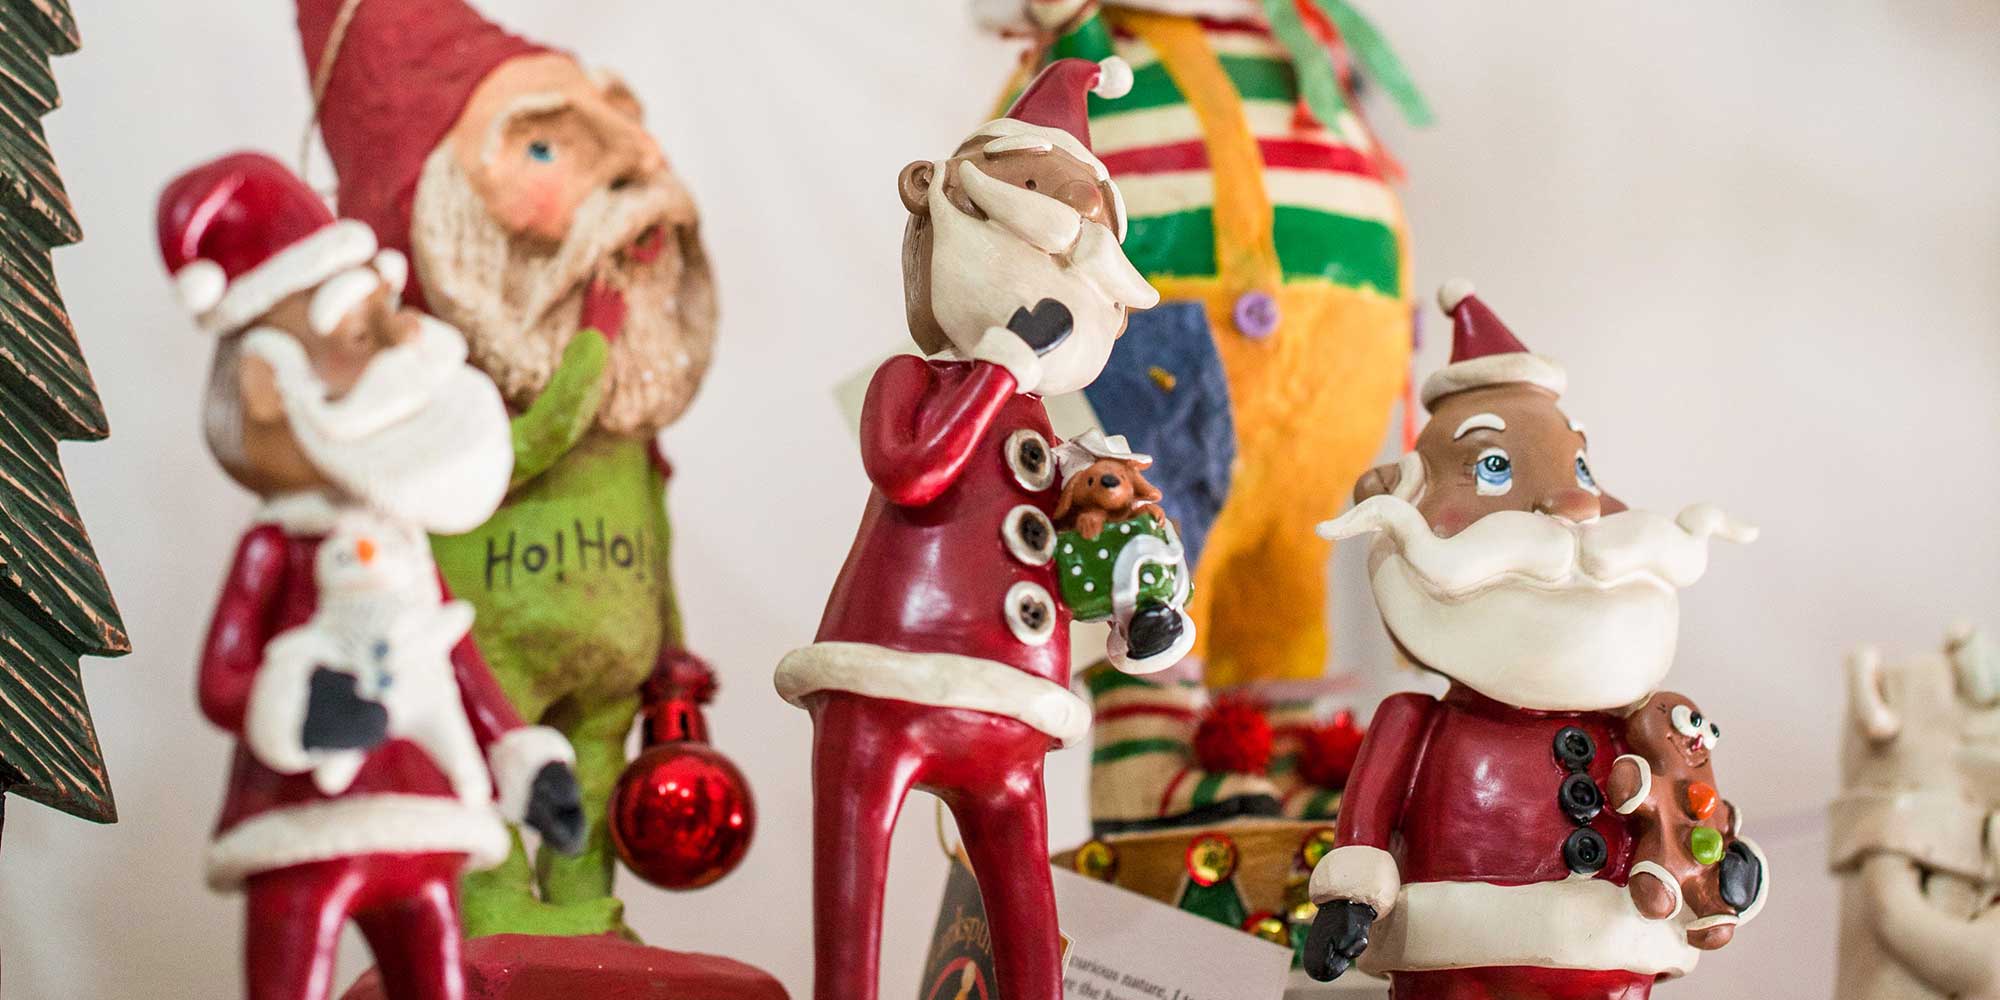 multiple hand crafted santas on a shelf